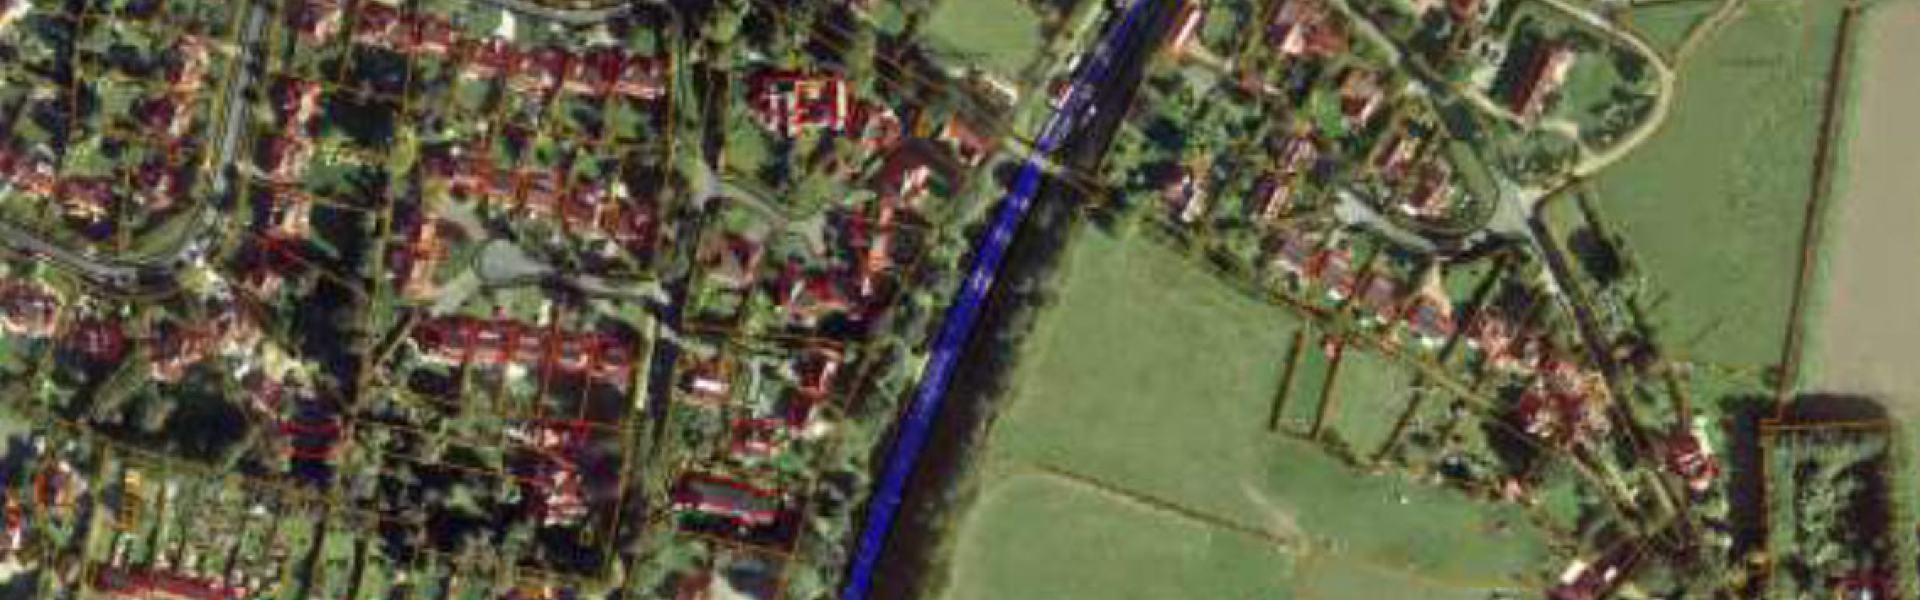 Development plans for a new housing estate in Groombridge village have been thrown out by Wealden's planning committee